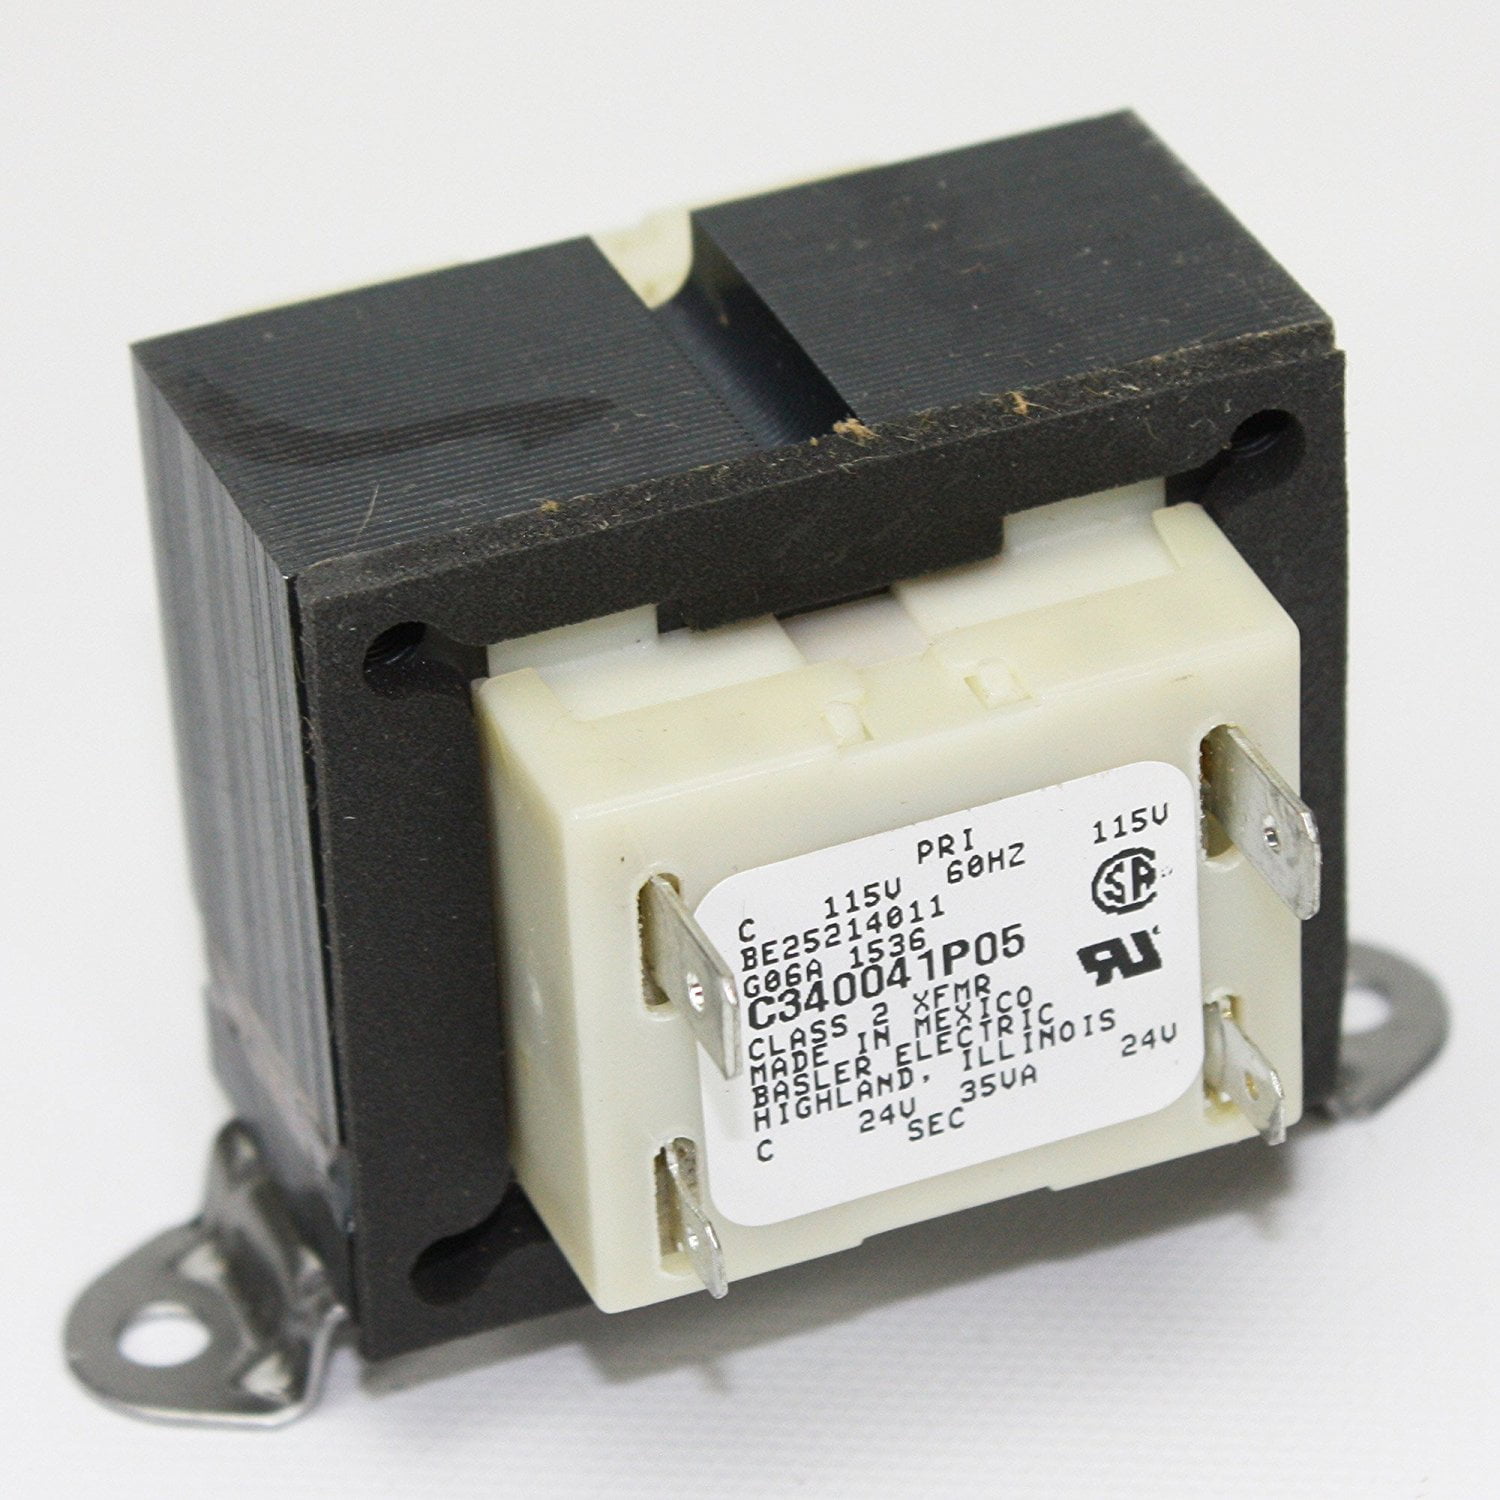 TRR01729 - OEM Furnace Replacement Transformer, This is a Brand New OEM